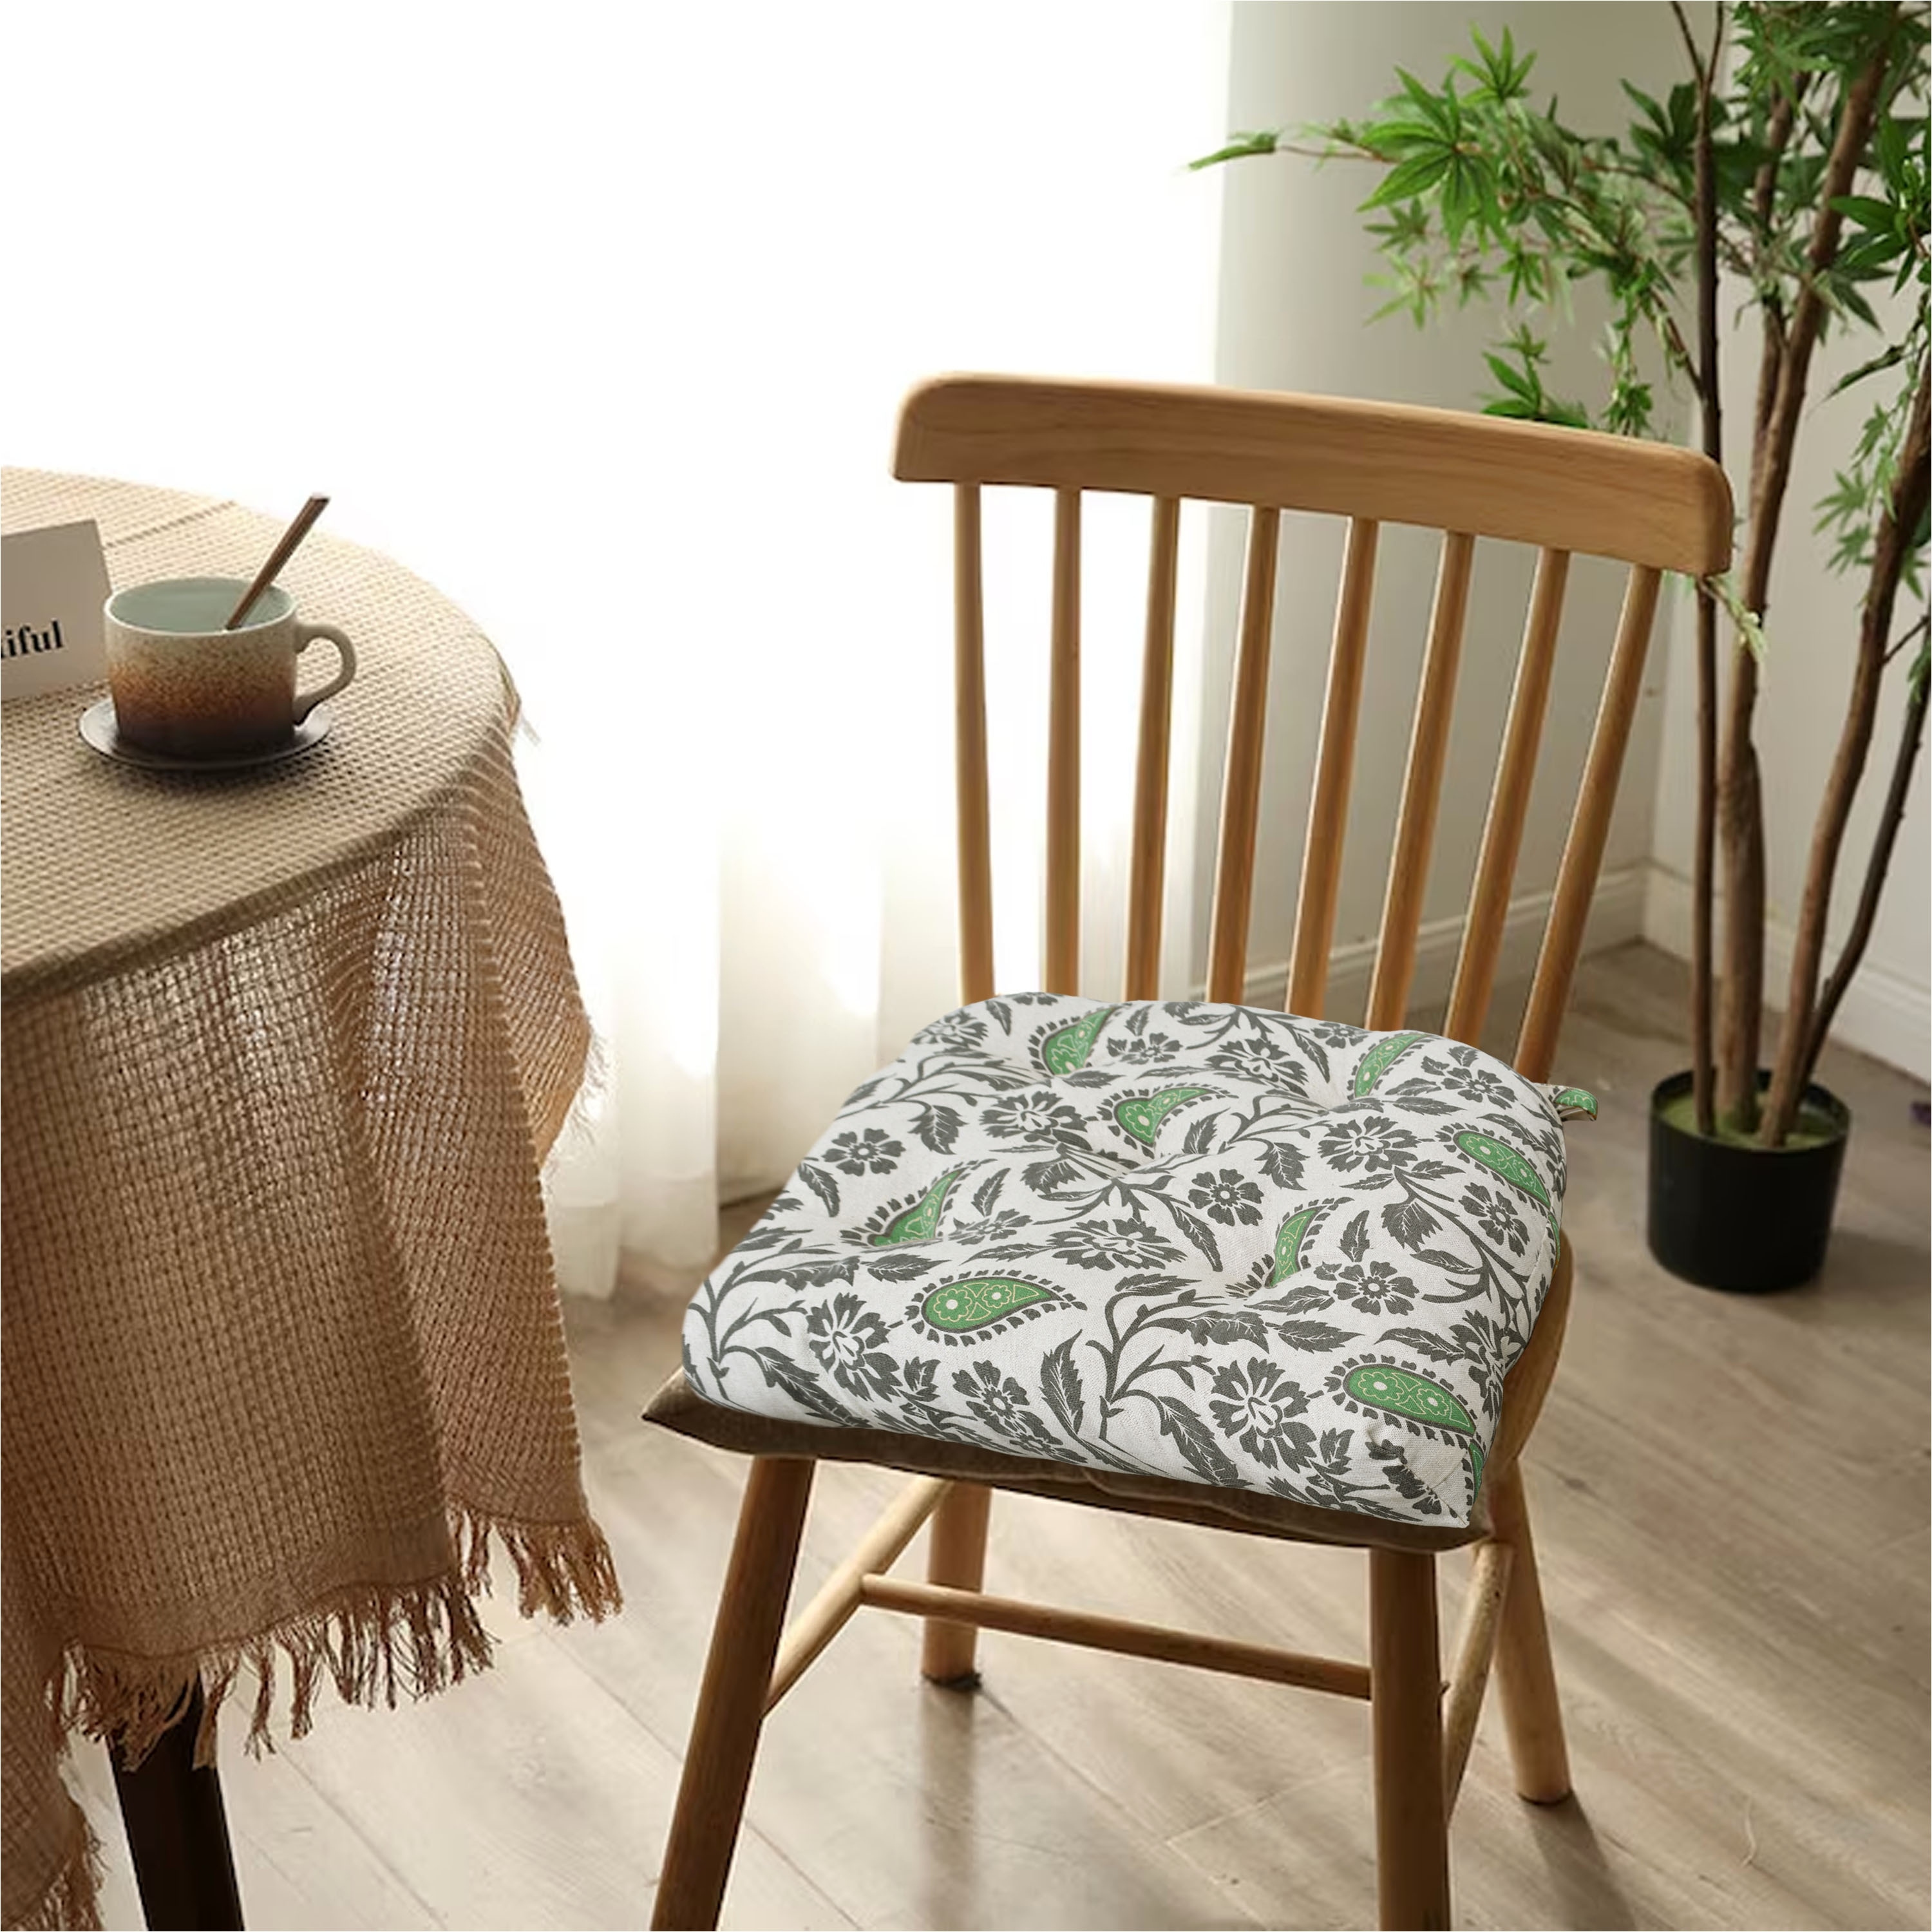 https://ak1.ostkcdn.com/images/products/is/images/direct/26c71980d0c6a35dfcd13334dfc0038408238a41/Handmade-Cotton-Chair-Seat-Pads-Cushions---Comfortable-Pad-with-Ties-%2816%27%27x16%27%27%29-3%27%27-Thick.jpg